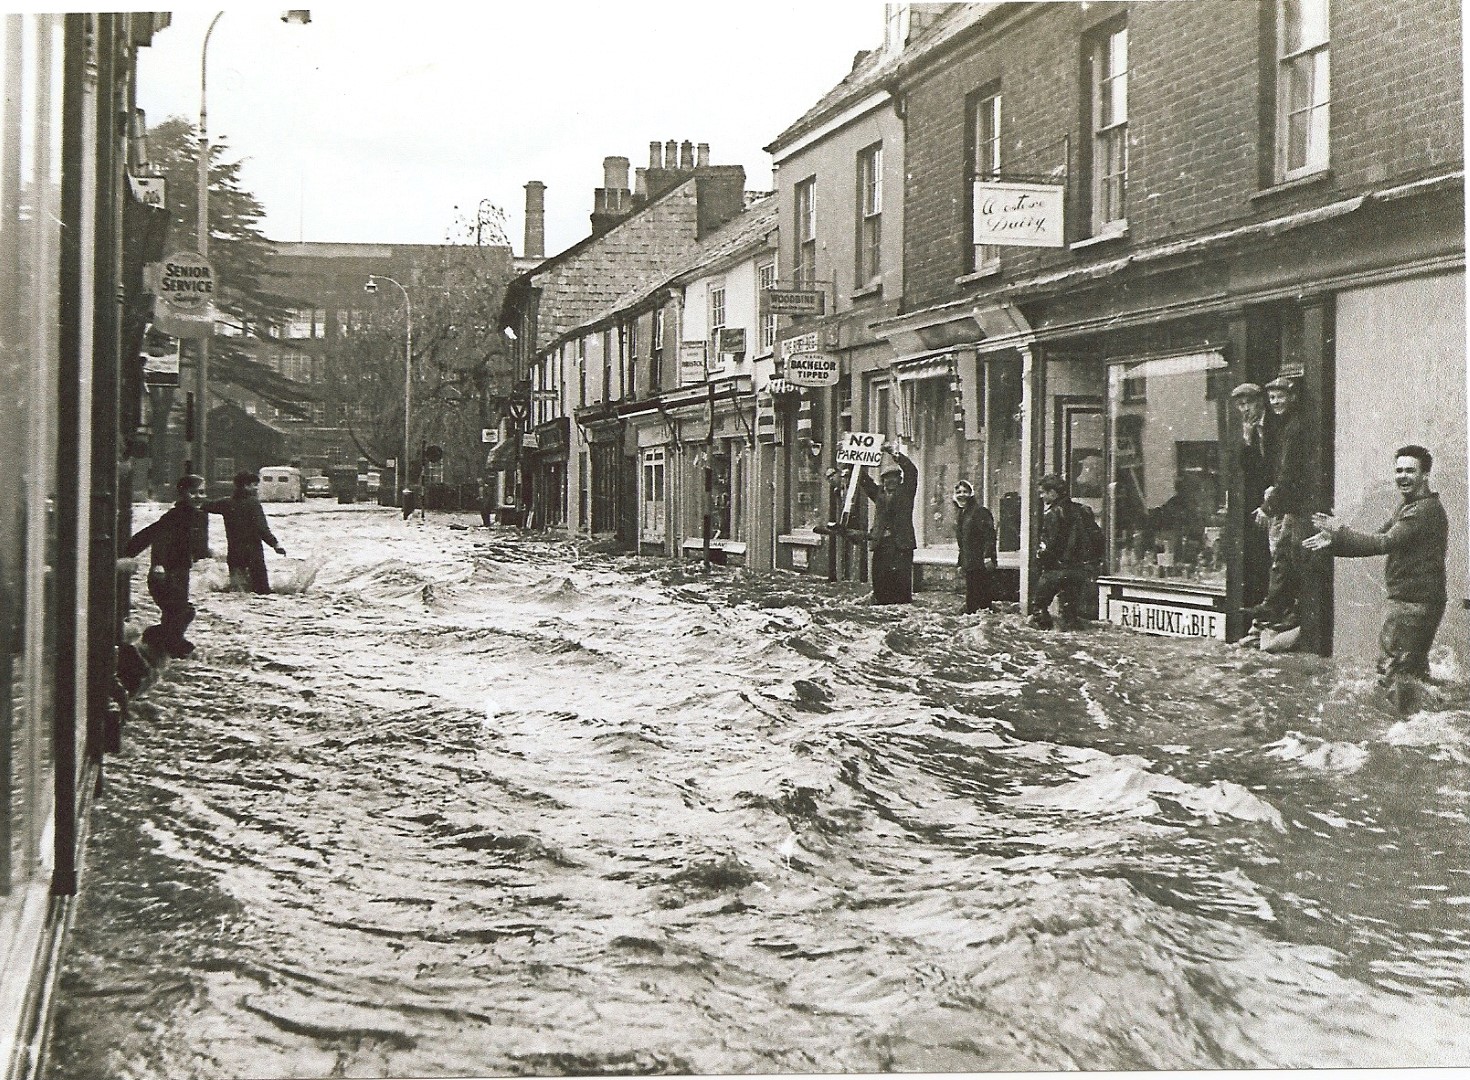 West Exe in Old Photographs